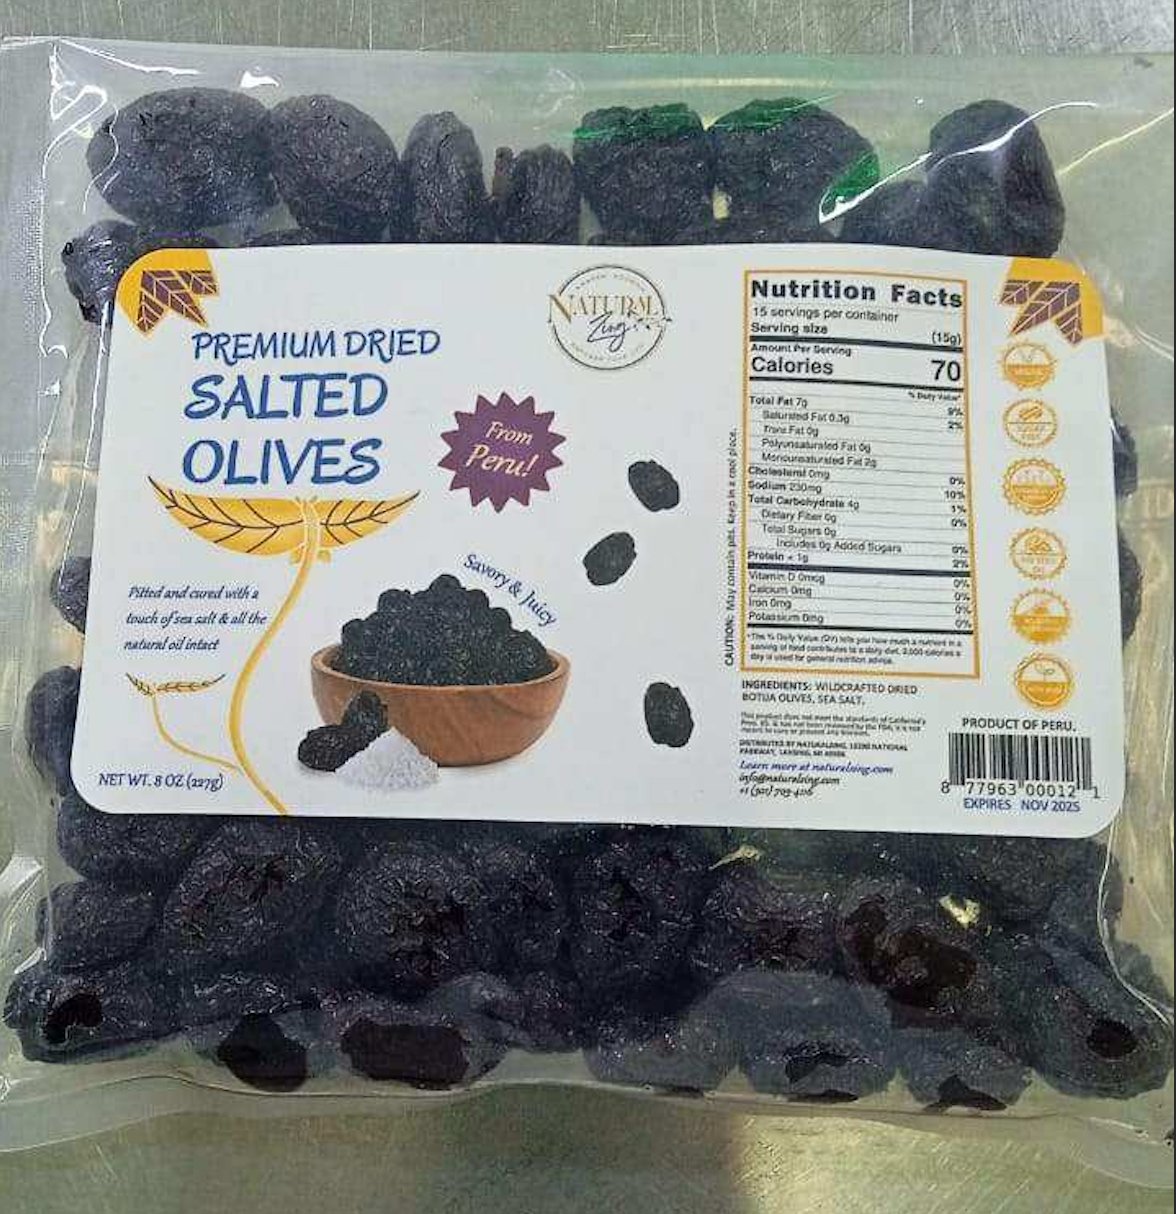 Peruvian Black Dried Olives (Salted, Pitted) 8 oz bag- Out of Stock, Try our 16oz and 5oz